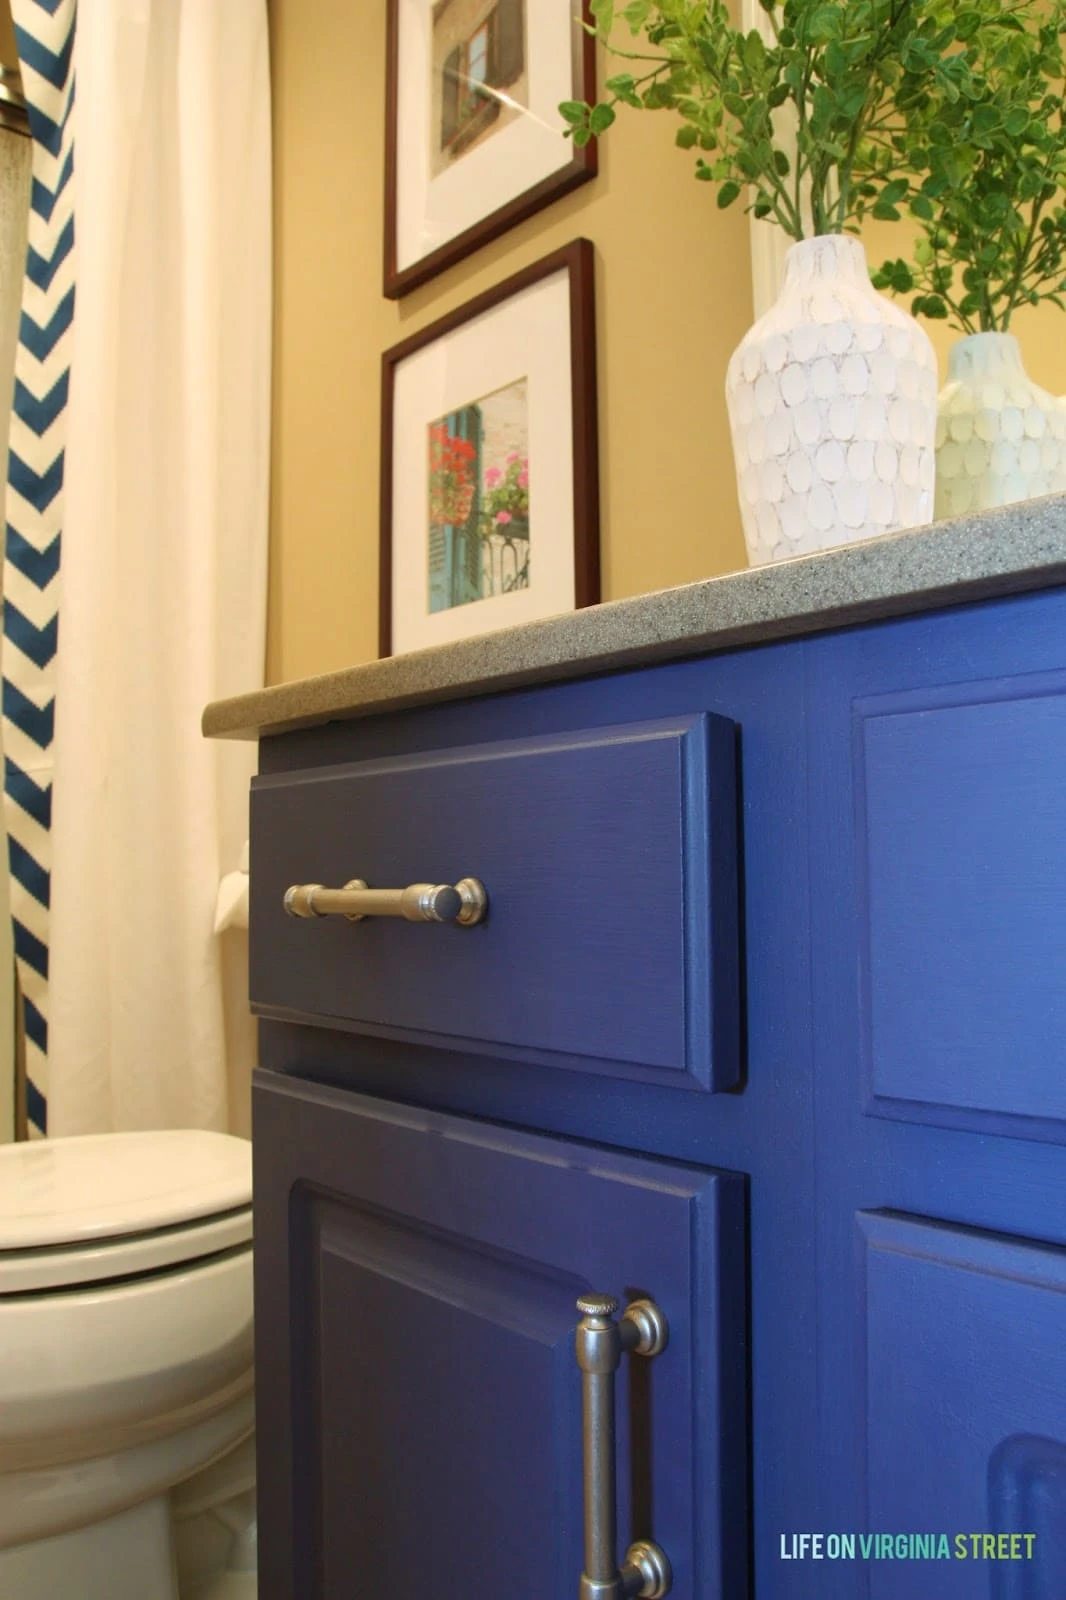 Painted laminate bathroom cabinets in bold blue.